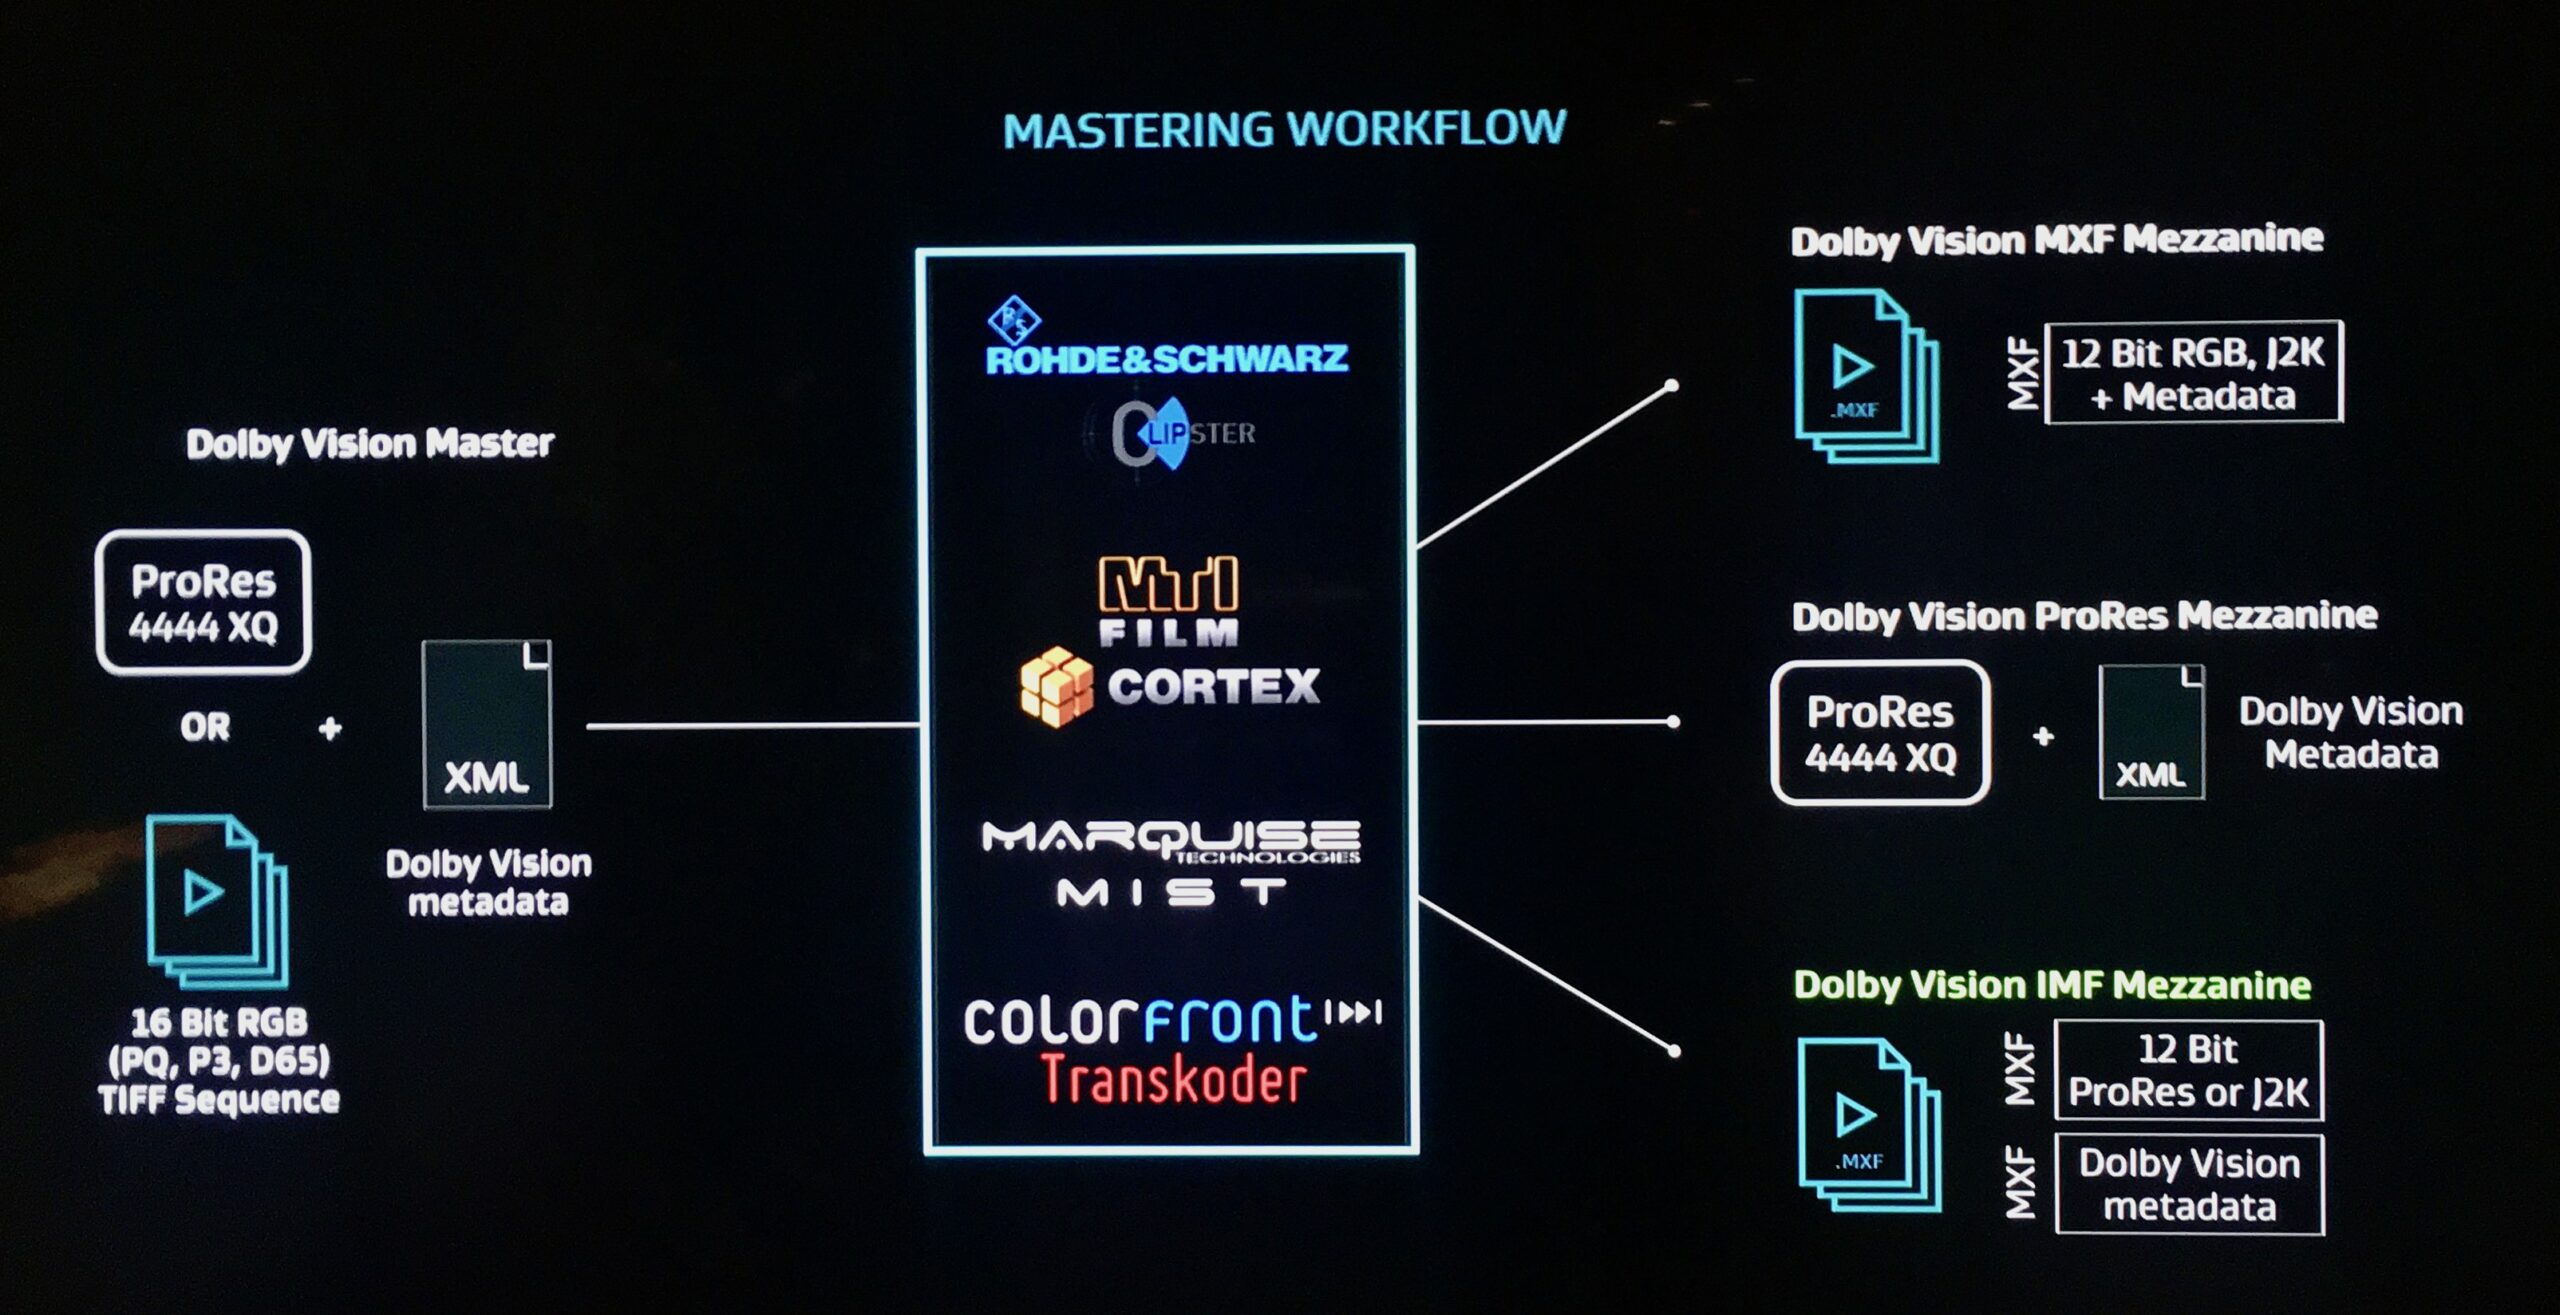 from grading system output to Dolby Mastering Workflow